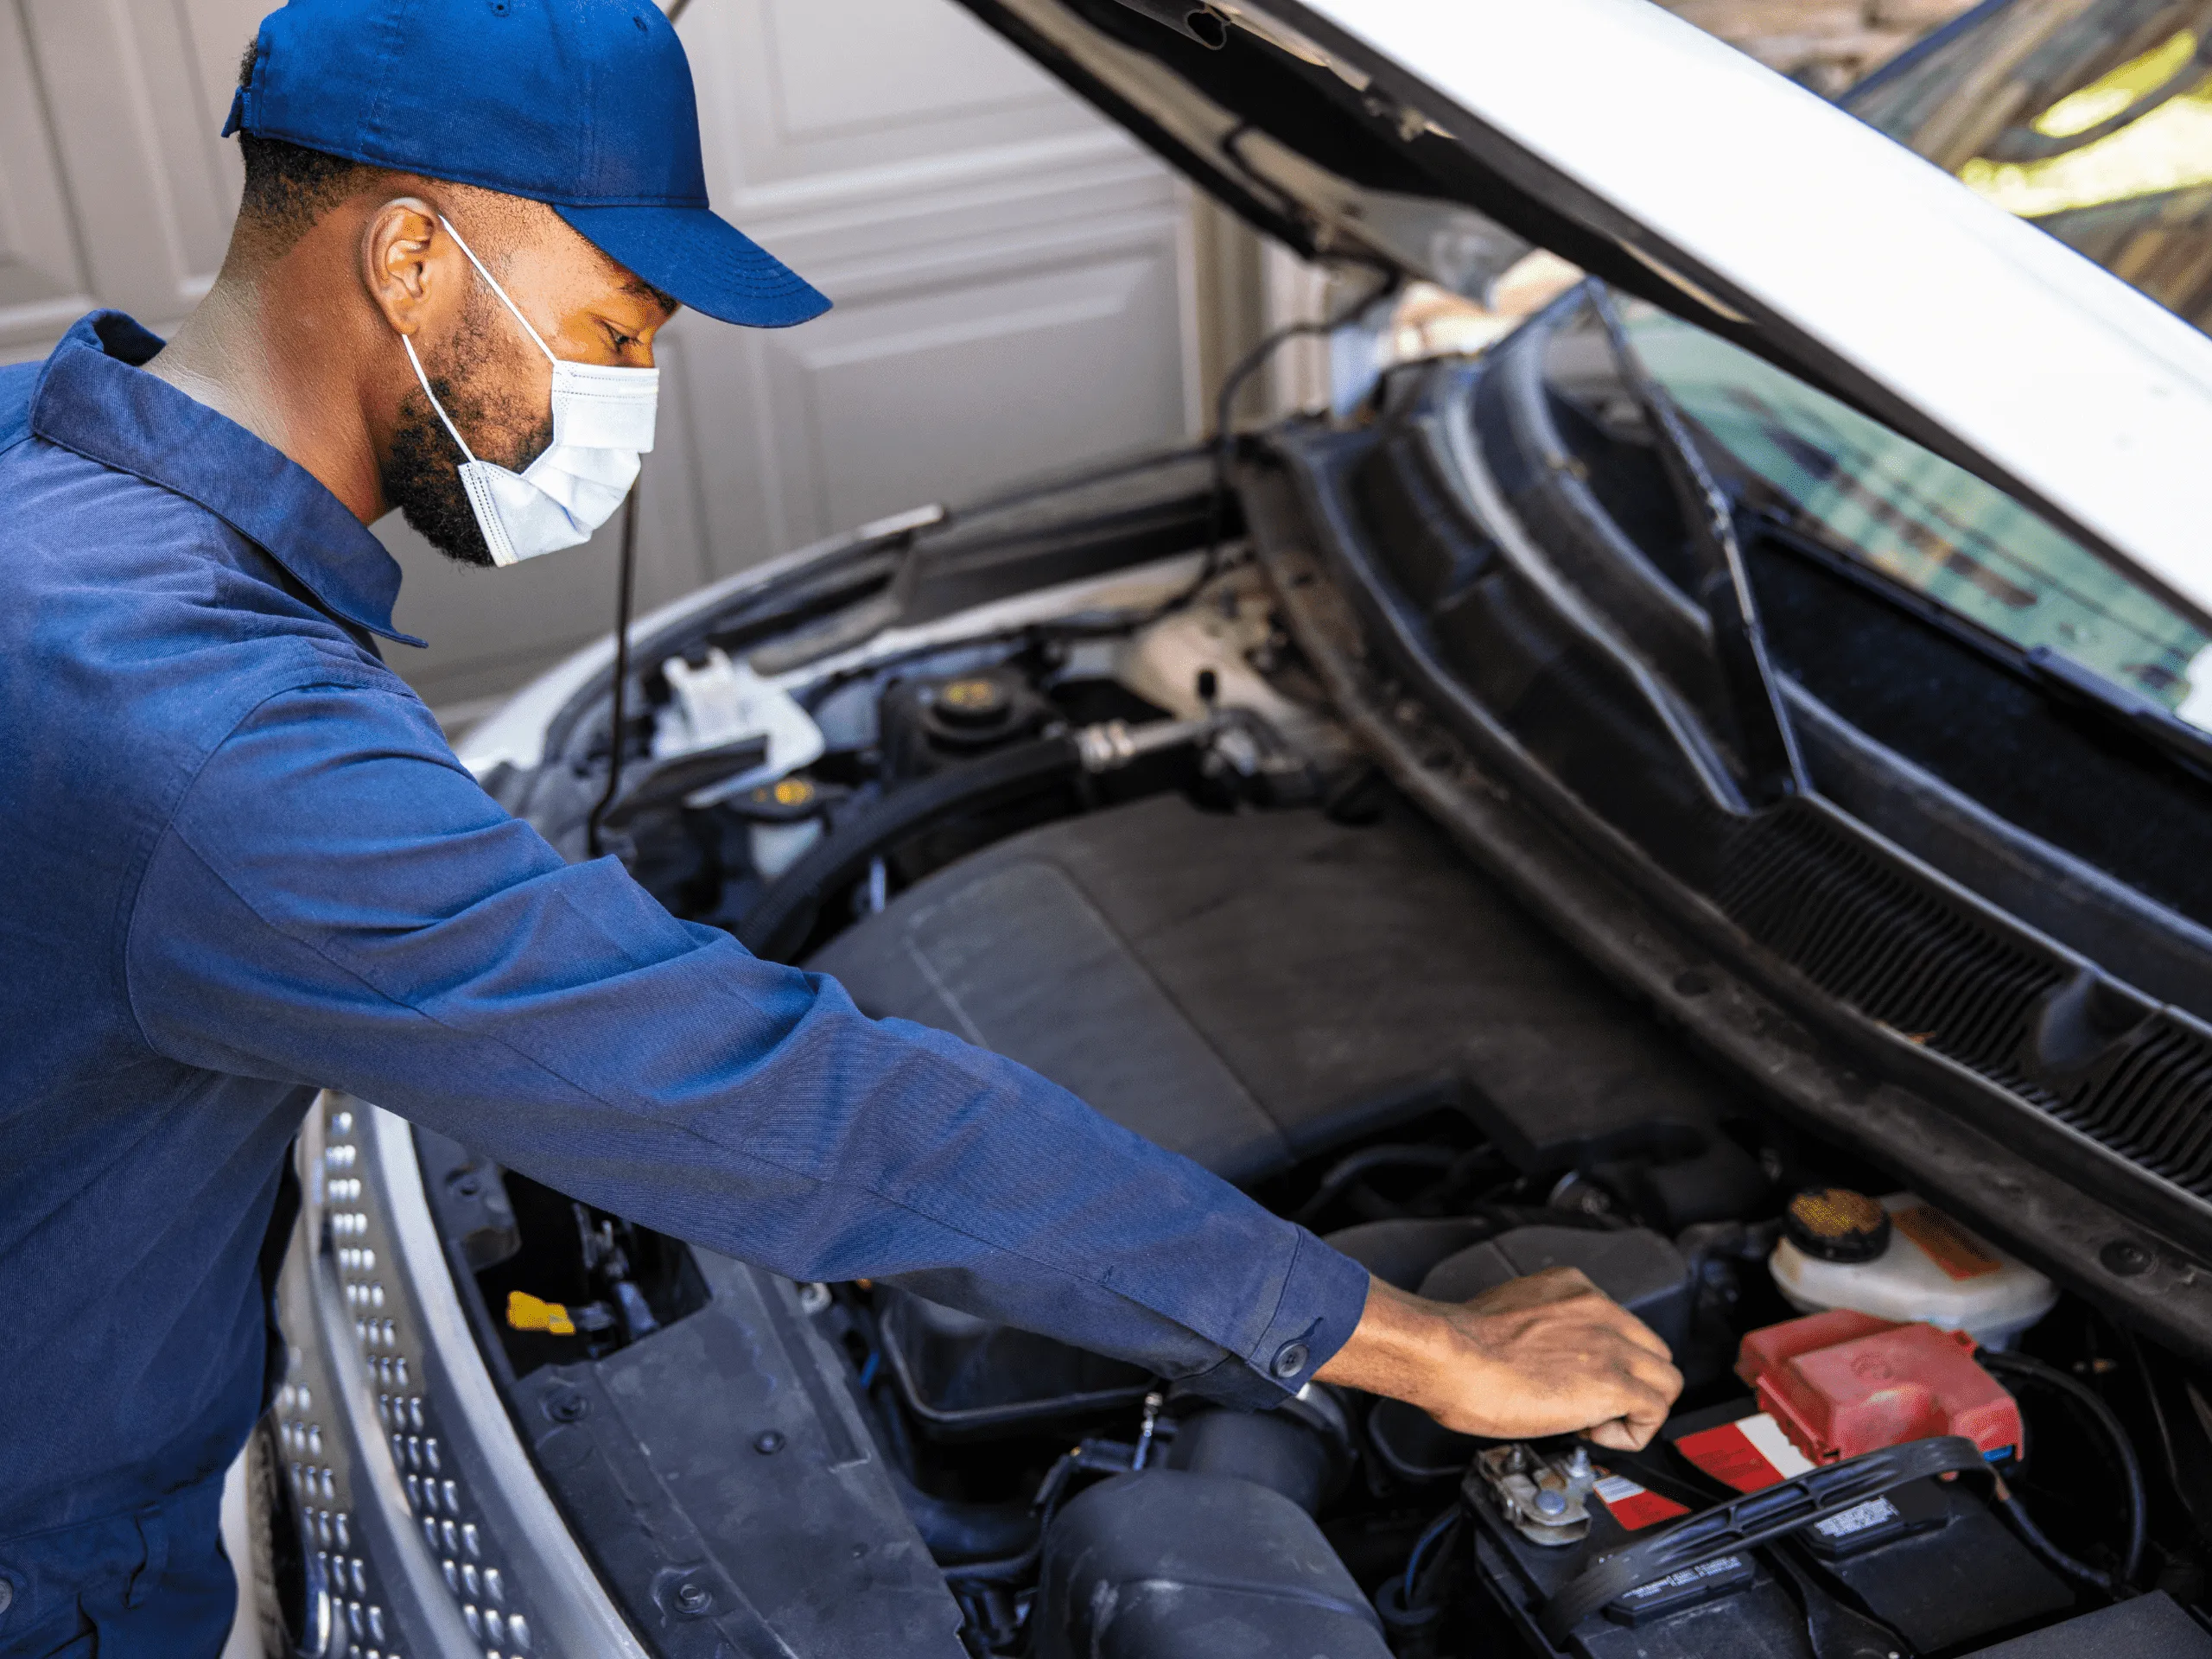 Mechanic checking the battery of a car with the bonnet open